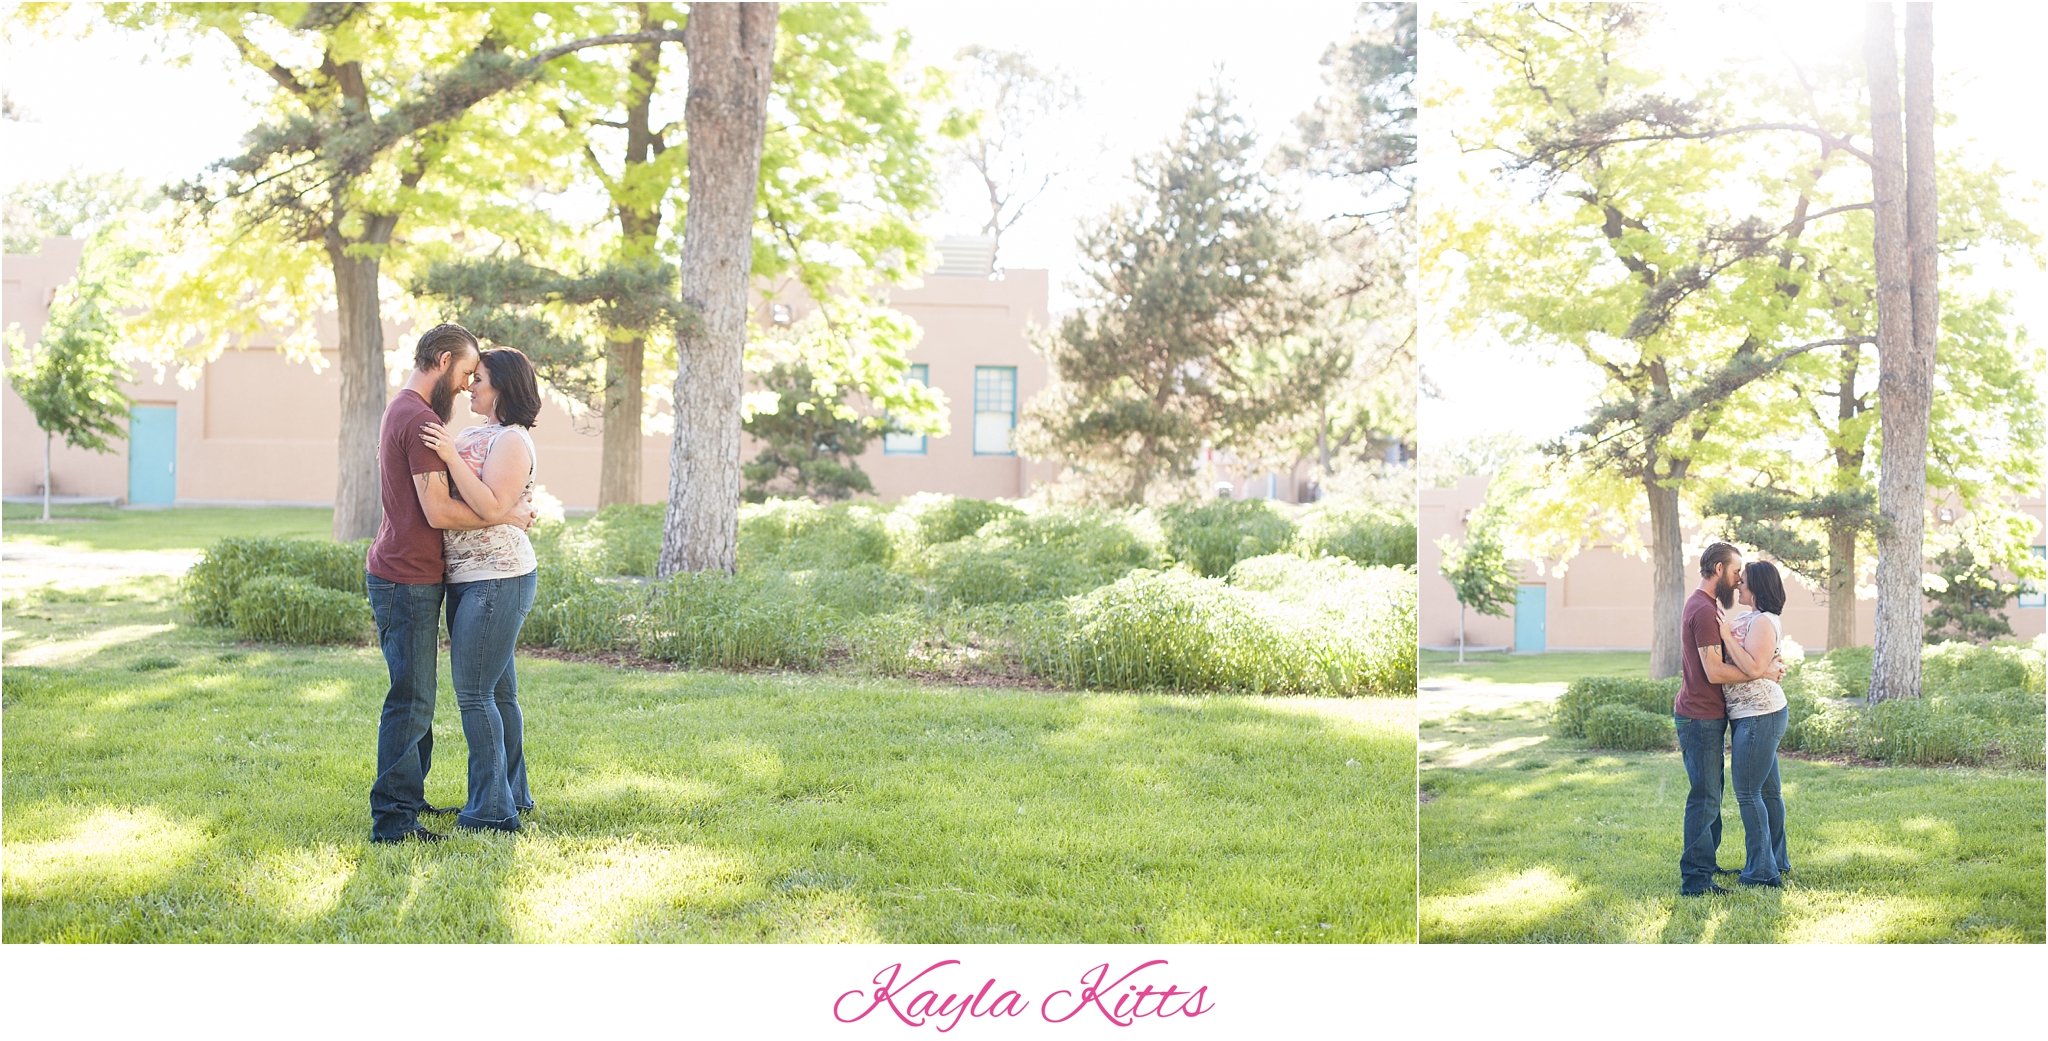 kayla kitts photography - albuquerque wedding photographer - albuquerque engagement photographer - nm wedding - albuquerque wedding - nm wedding - unm engagement - bosque engagement session_0008.jpg